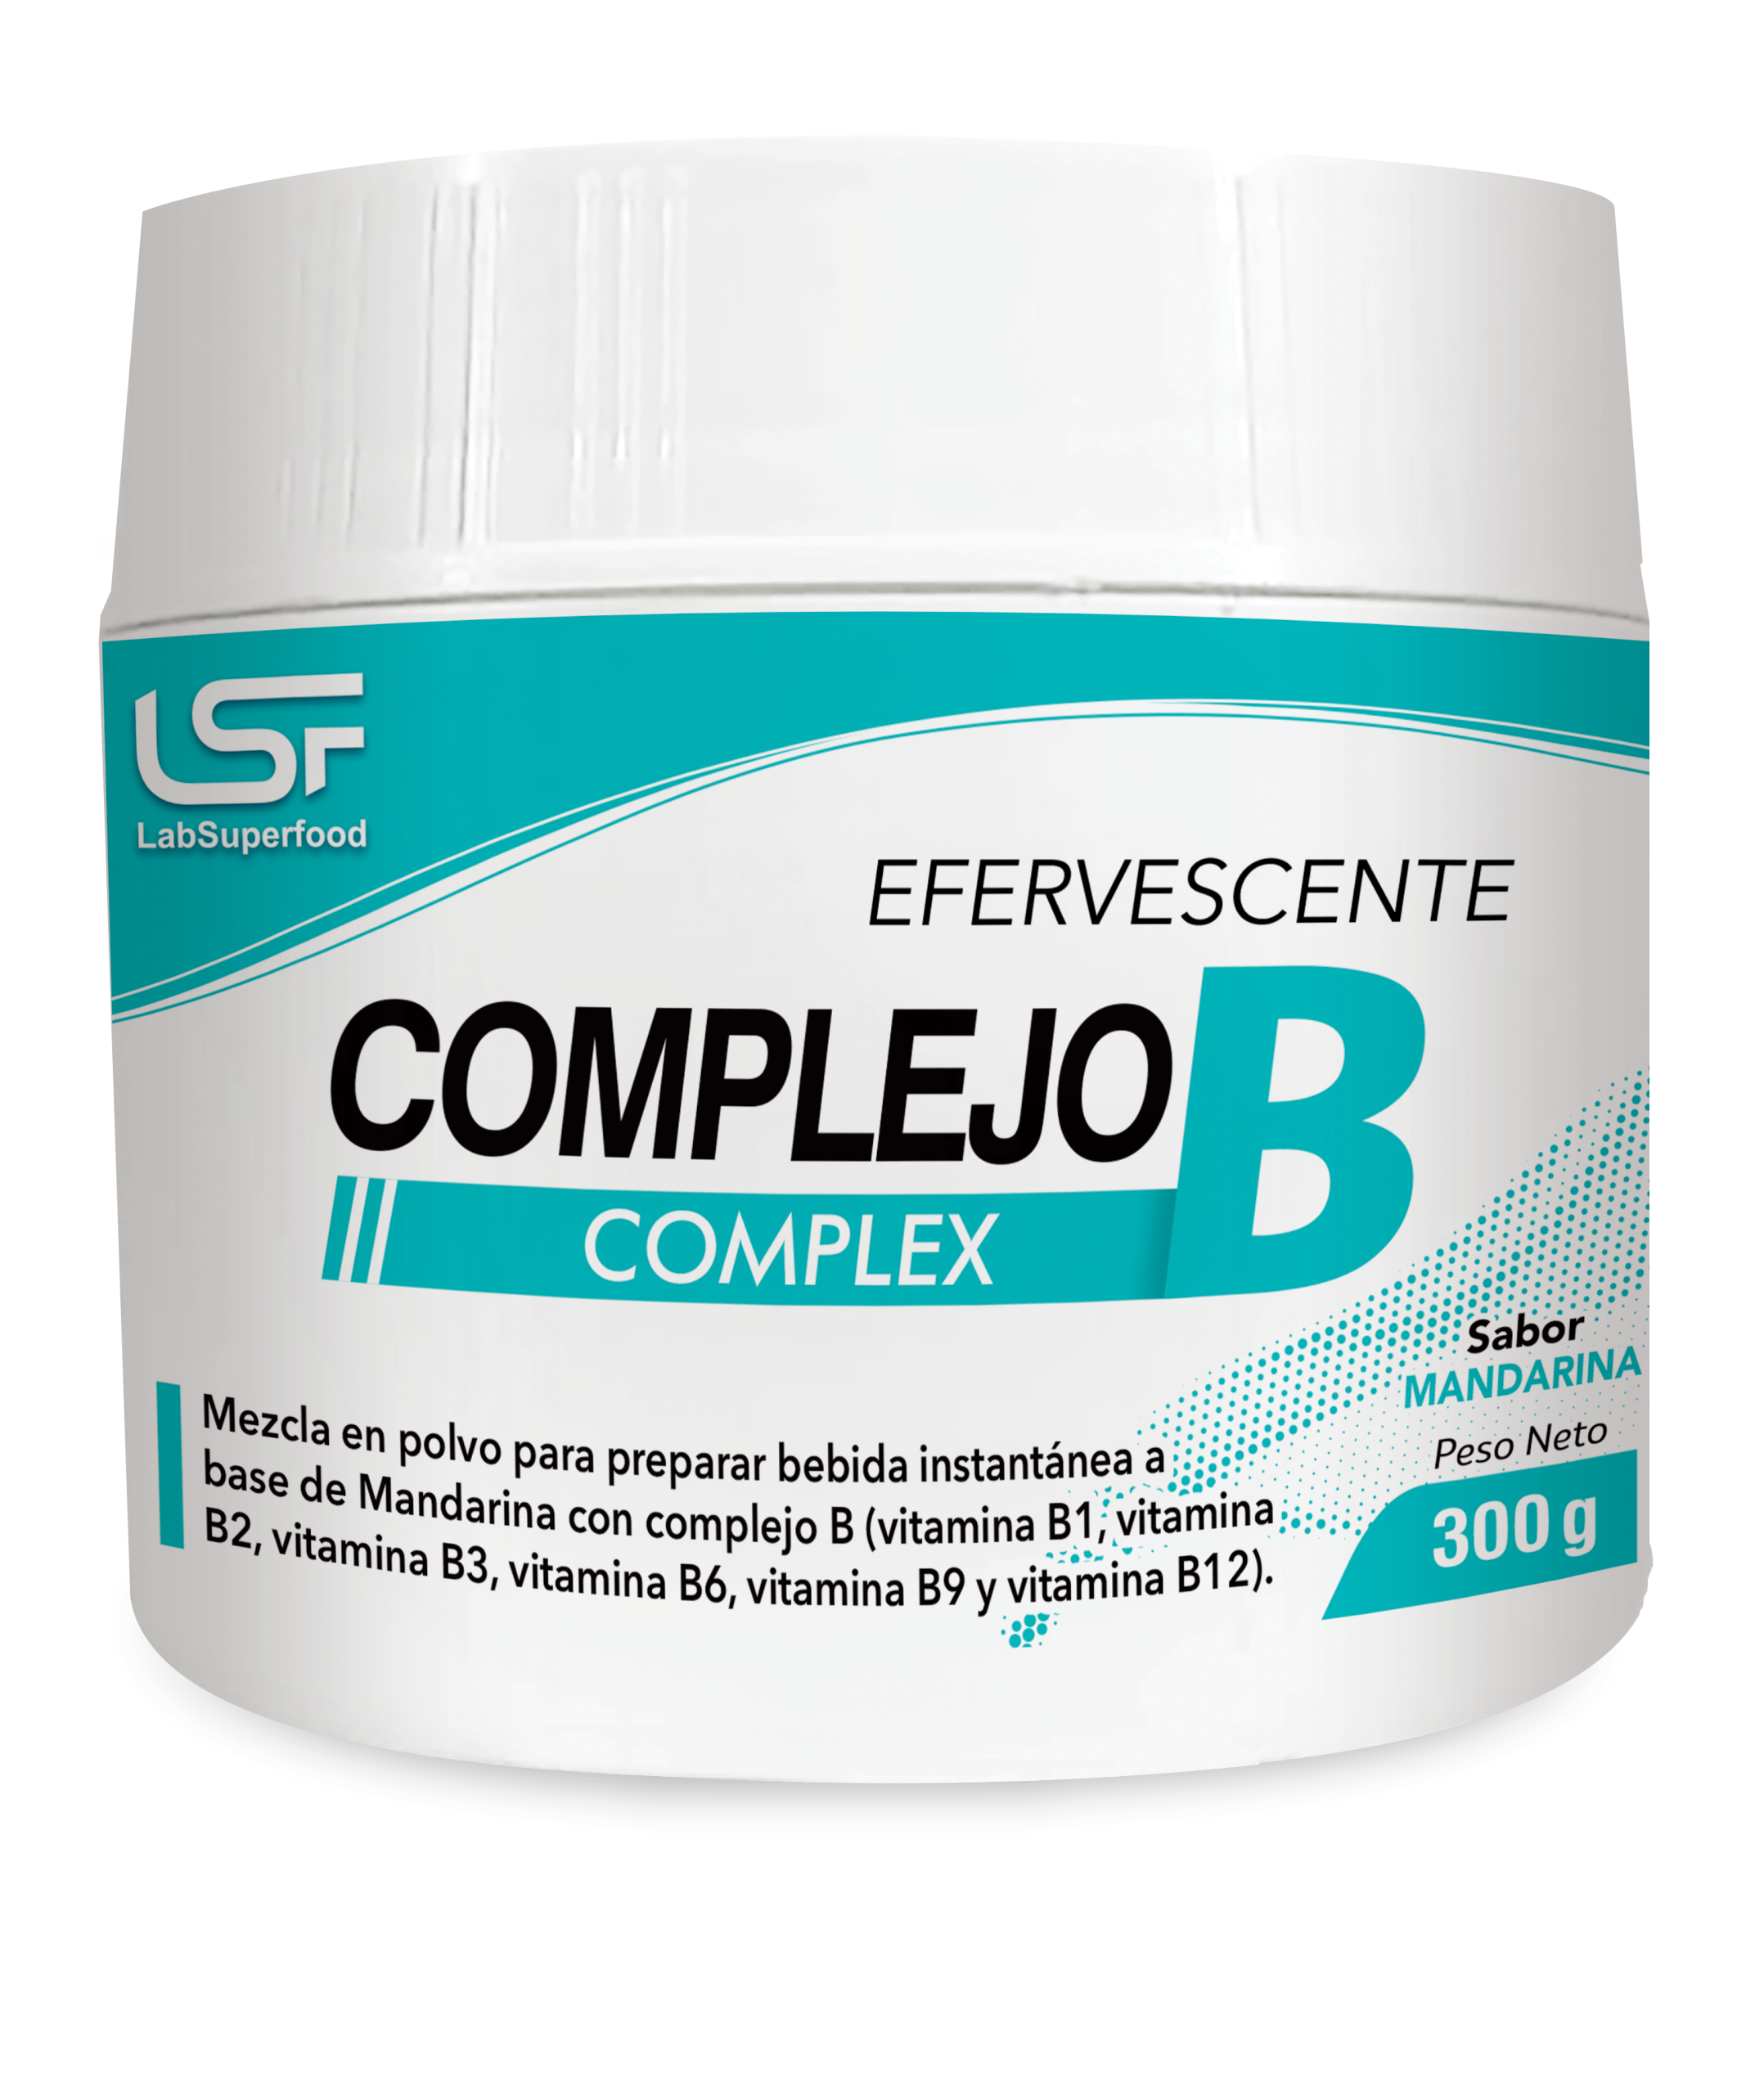 COMPLEJOBpotex300g.png